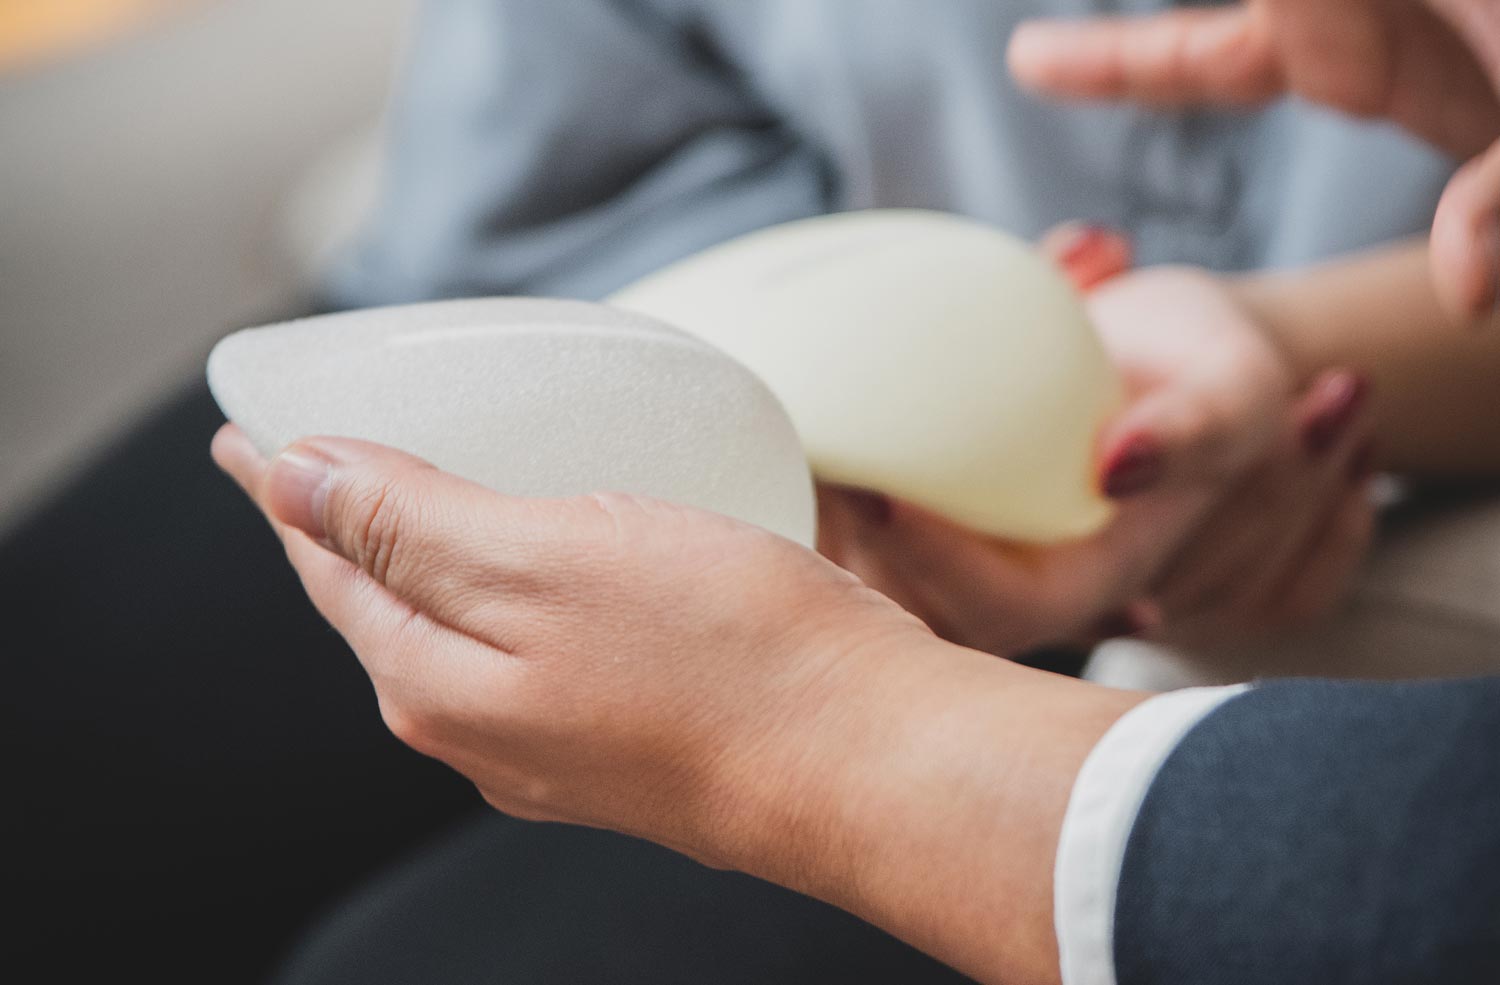 Breast implant problems, Capsular contracture